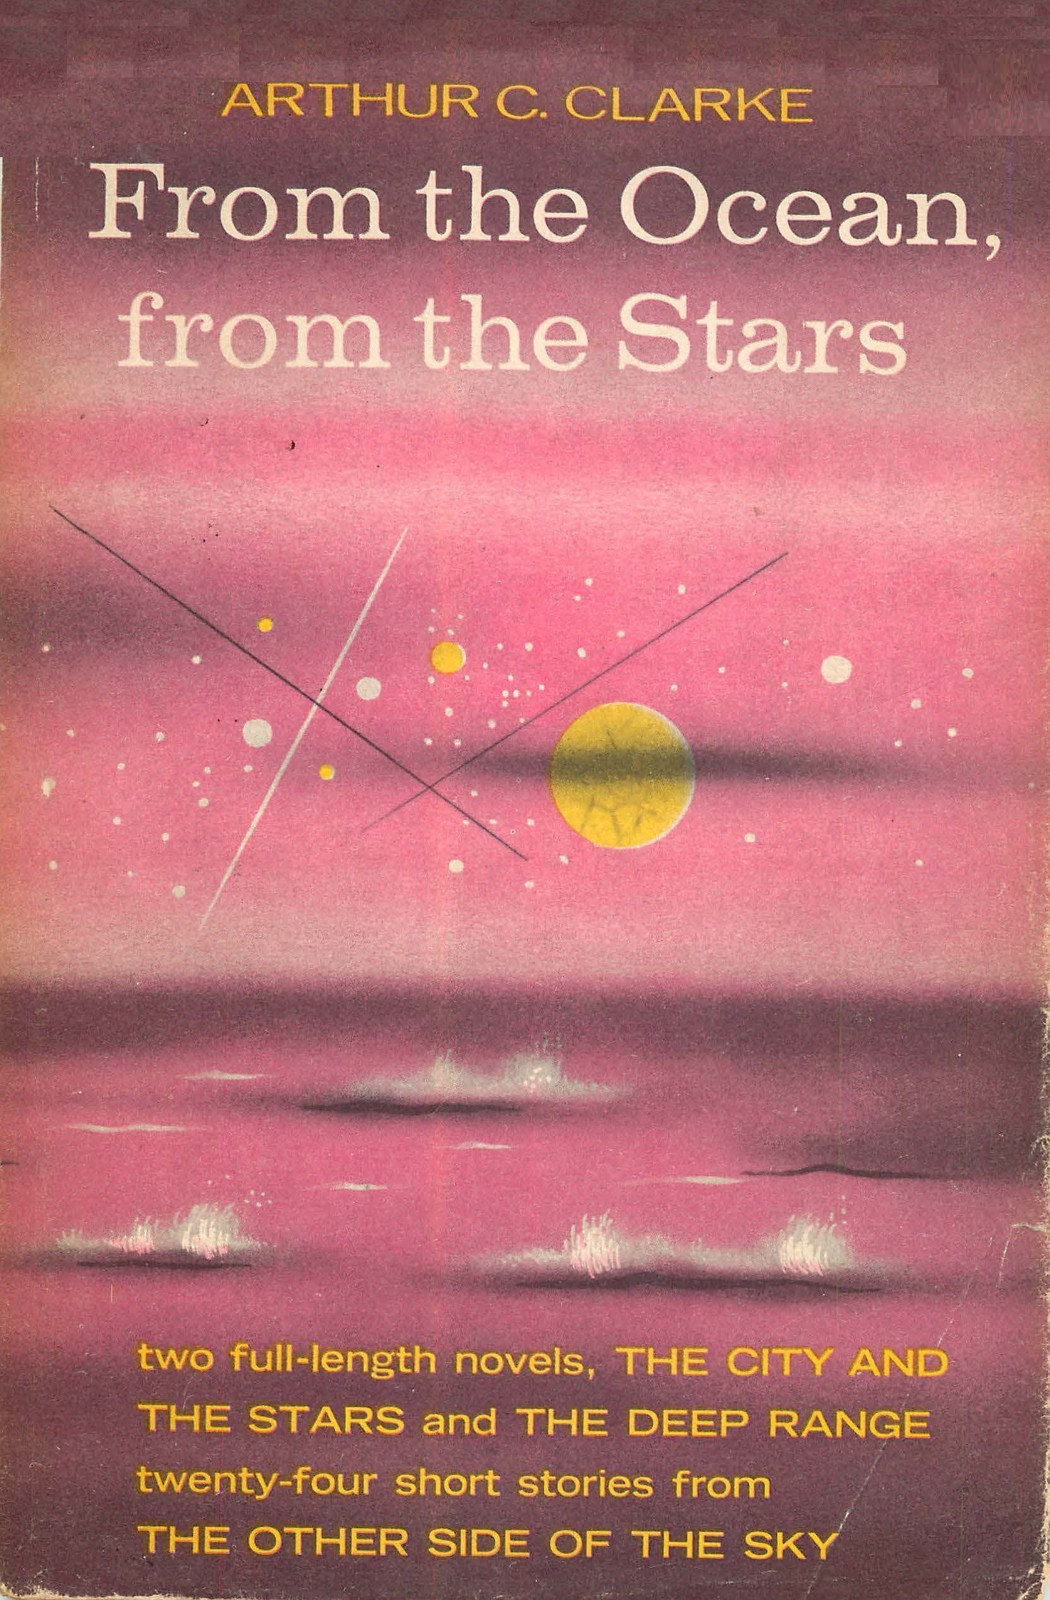 From the Ocean from teh Stars by Arthur C. Clarke